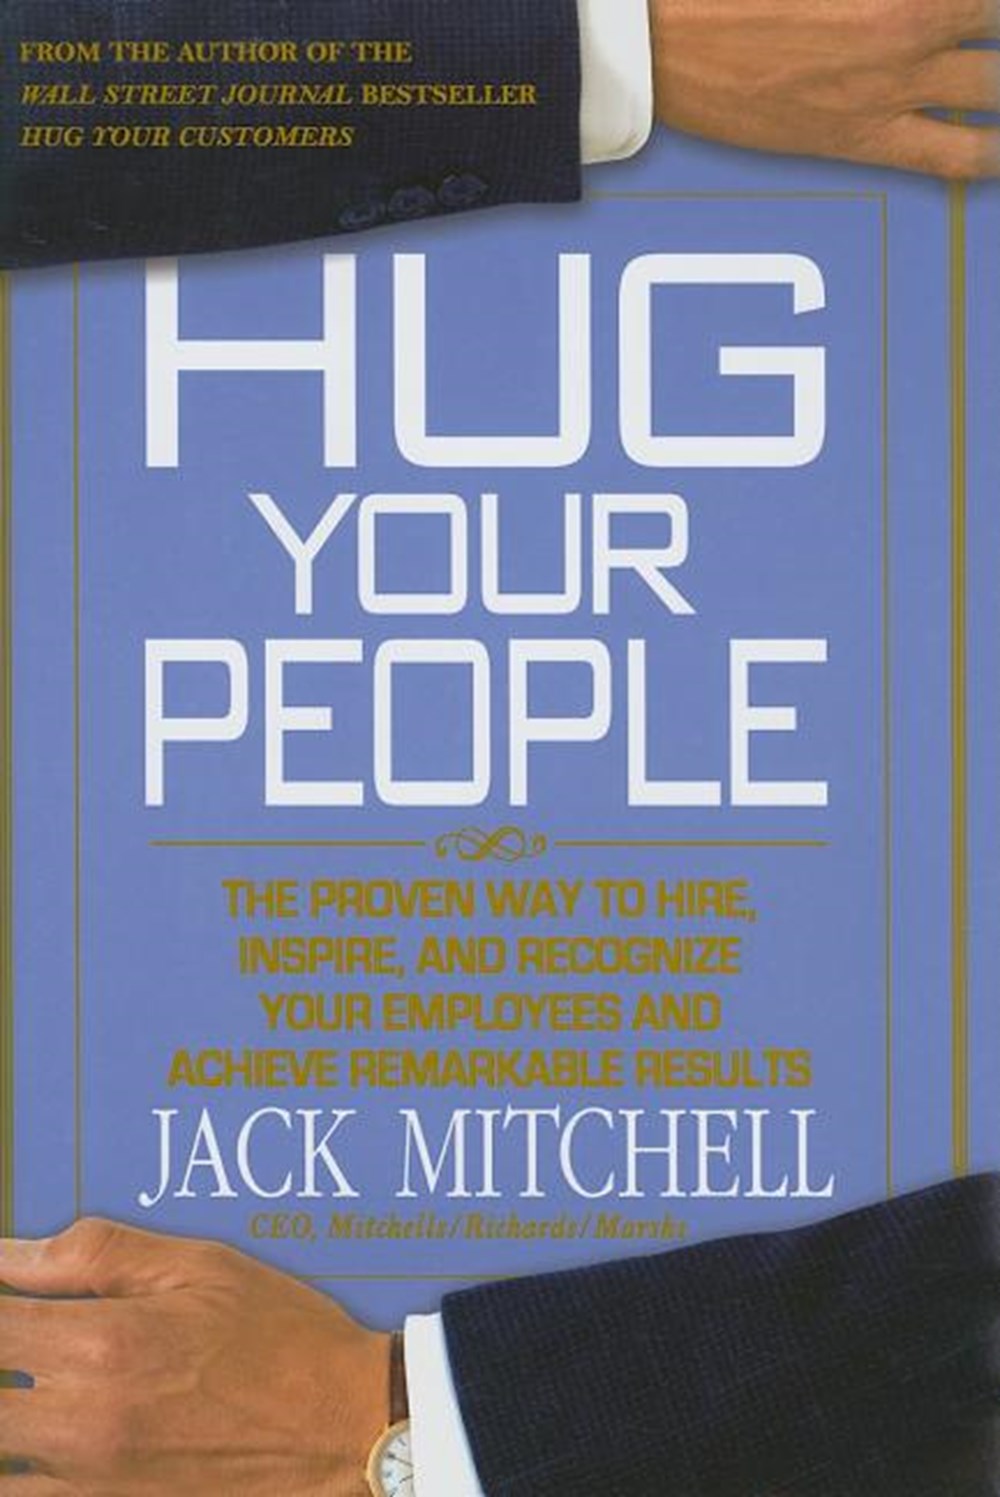 Hug Your People The Proven Way to Hire, Inspire, and Recognize Your Employees and Achieve Remarkable